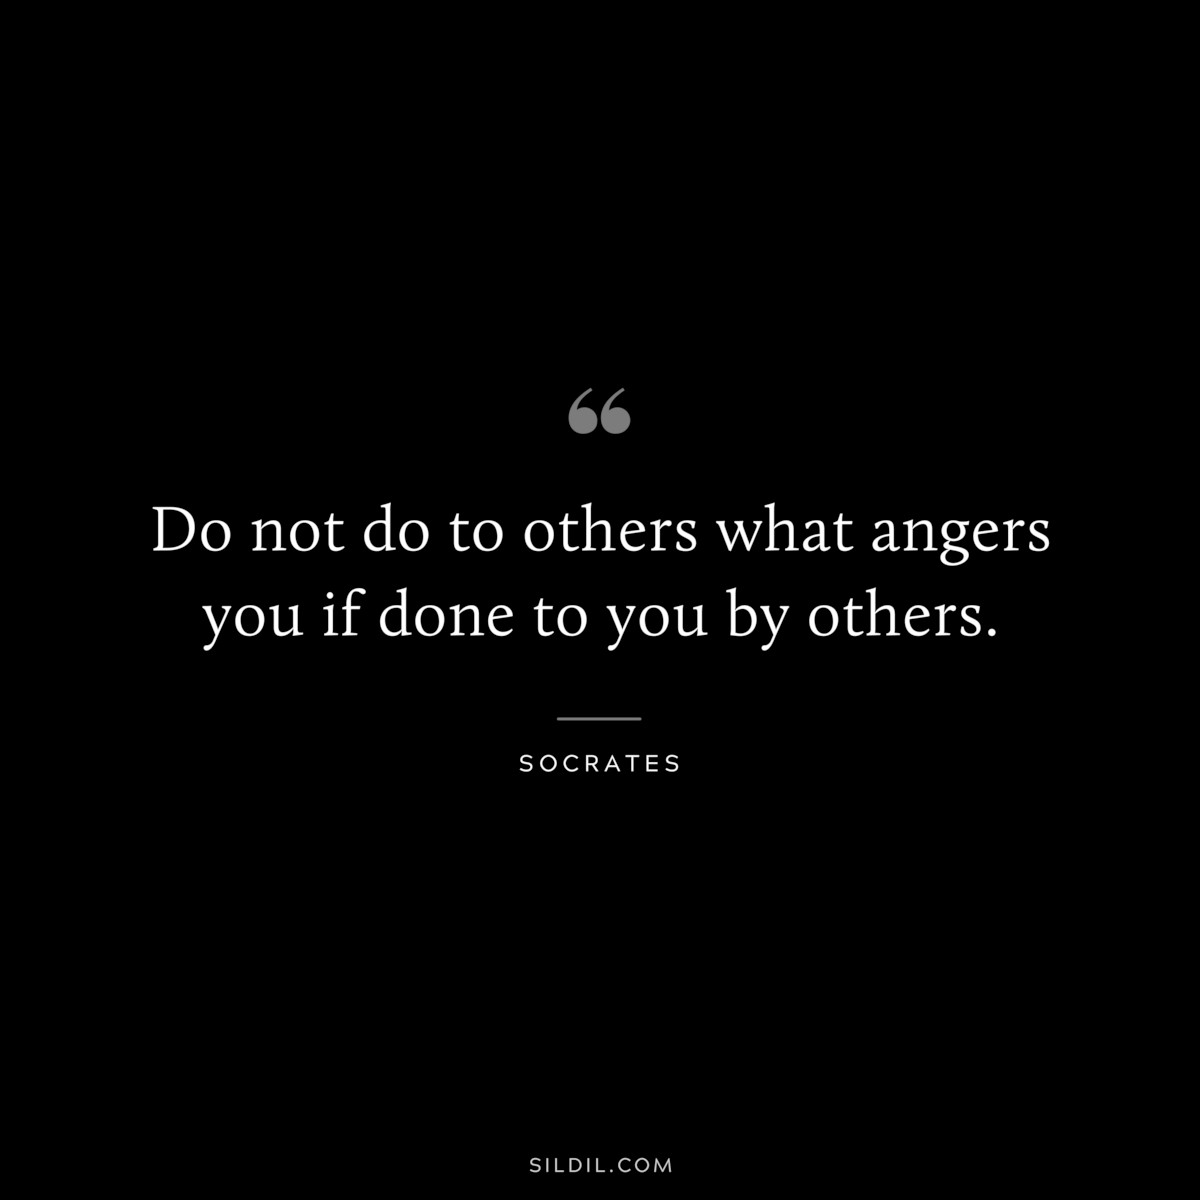 Do not do to others what angers you if done to you by others. ― Socrates